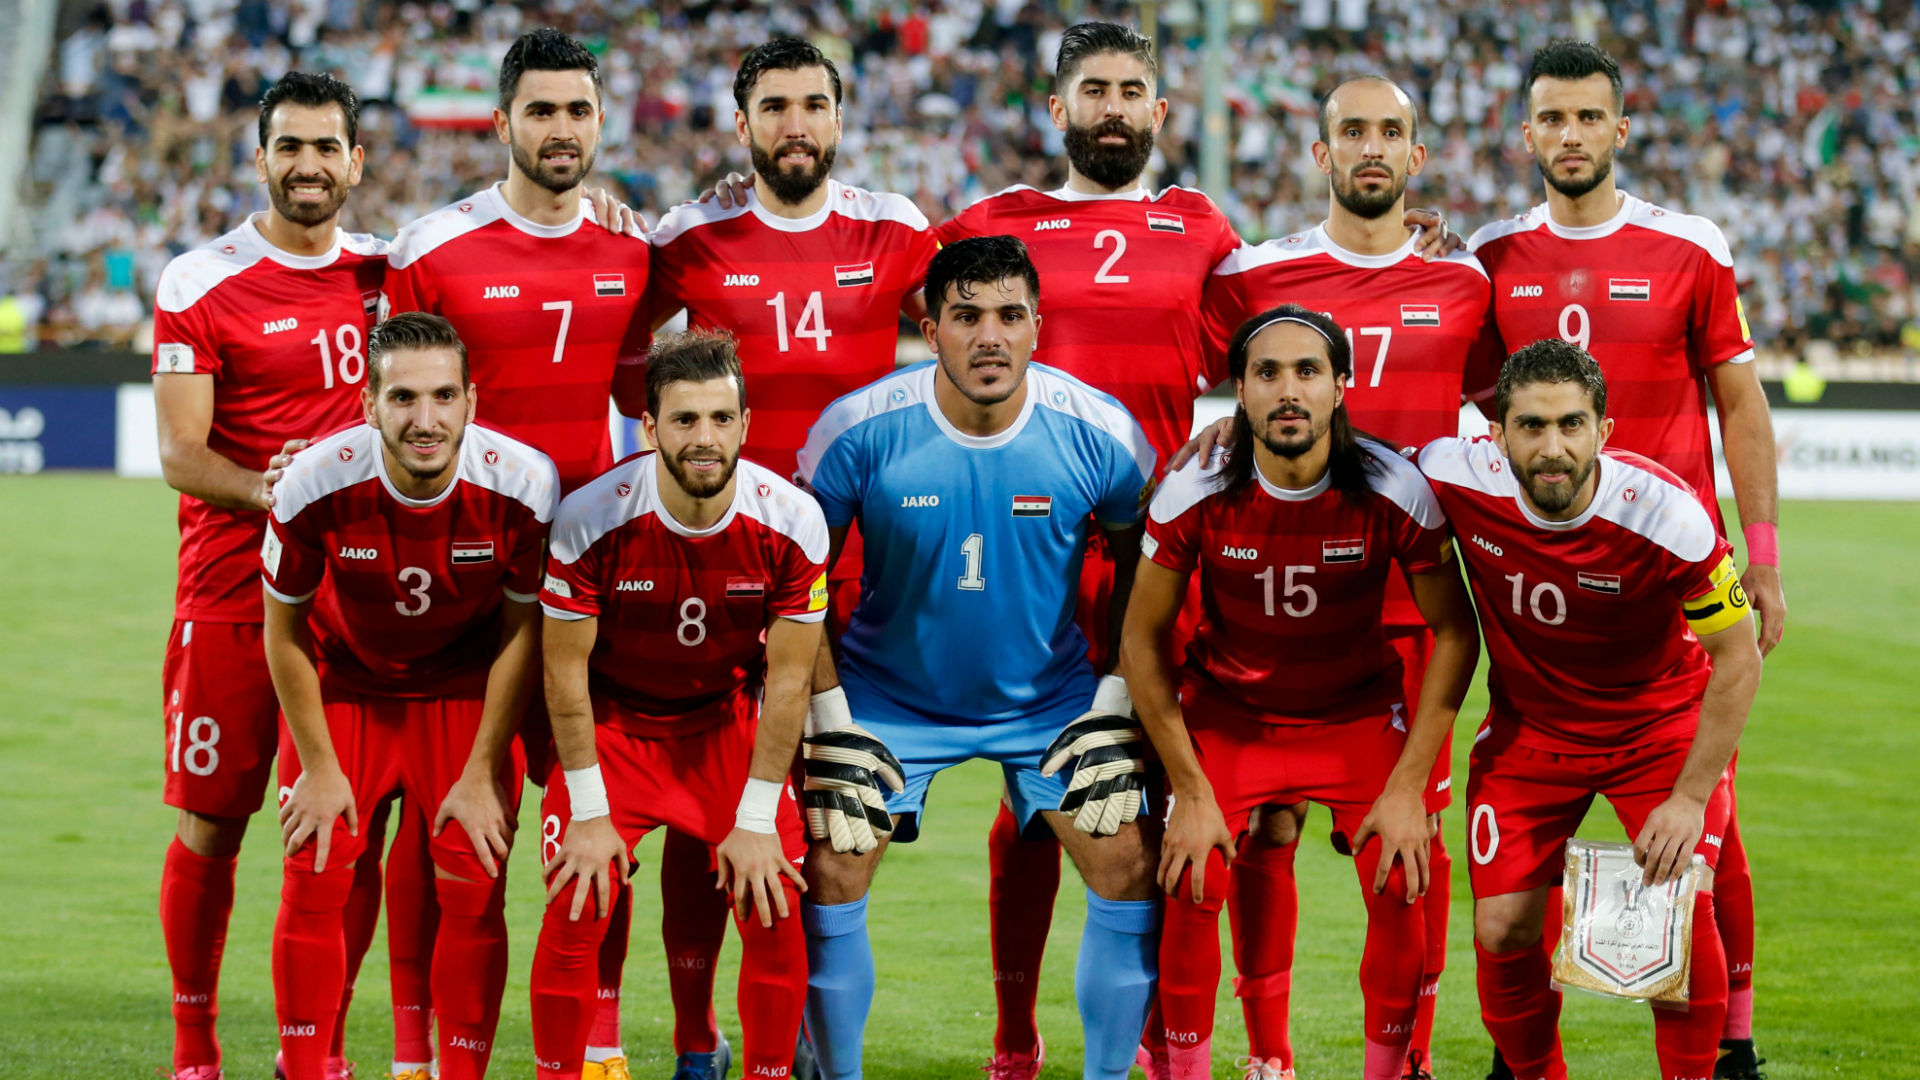 Road to Russia This week in Middle East football